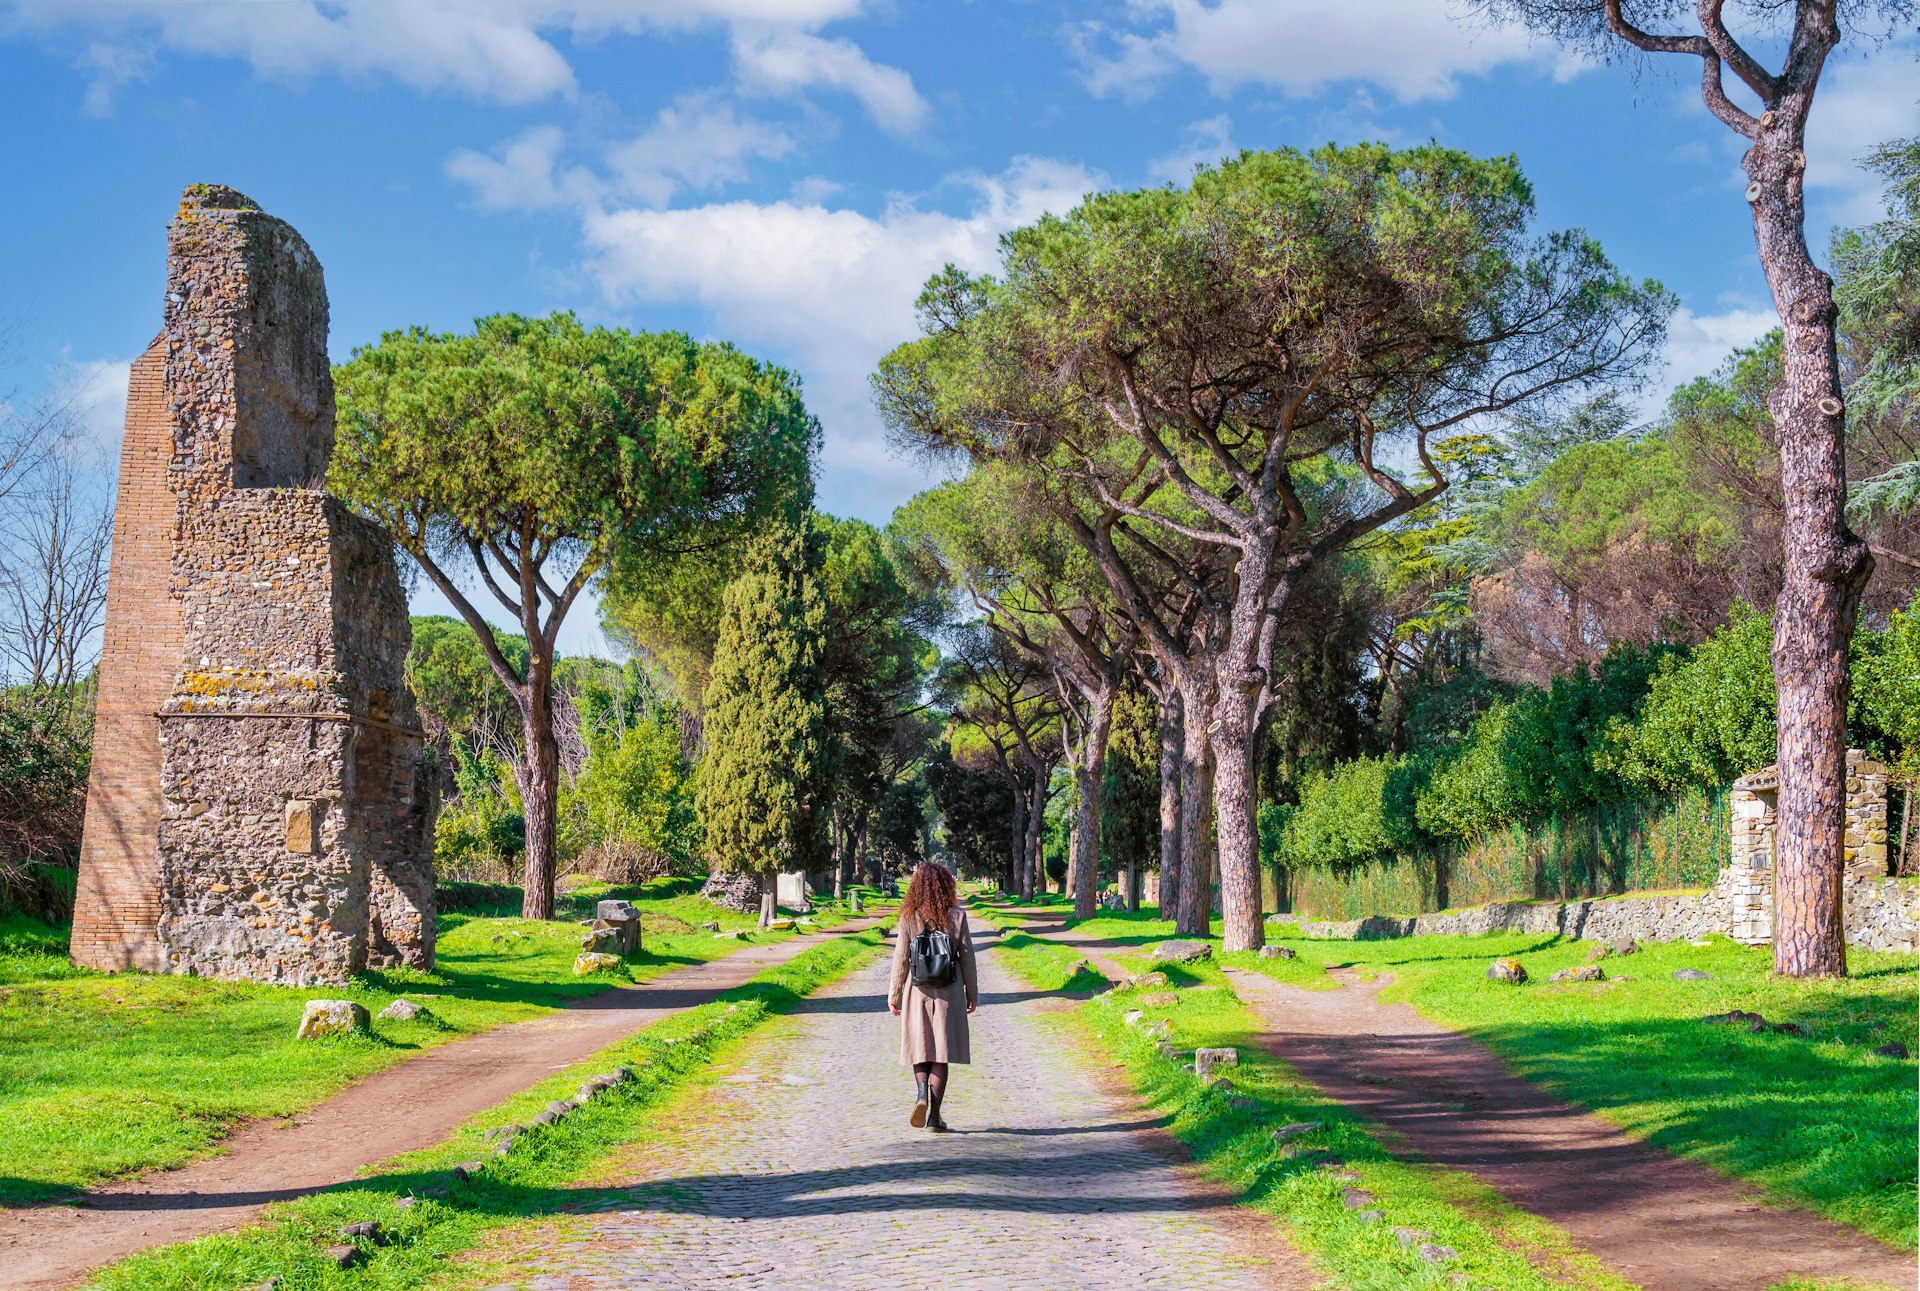 A woman walks along a path next to the archaeological ruins on the Via Appia Antica in Rome, Italy